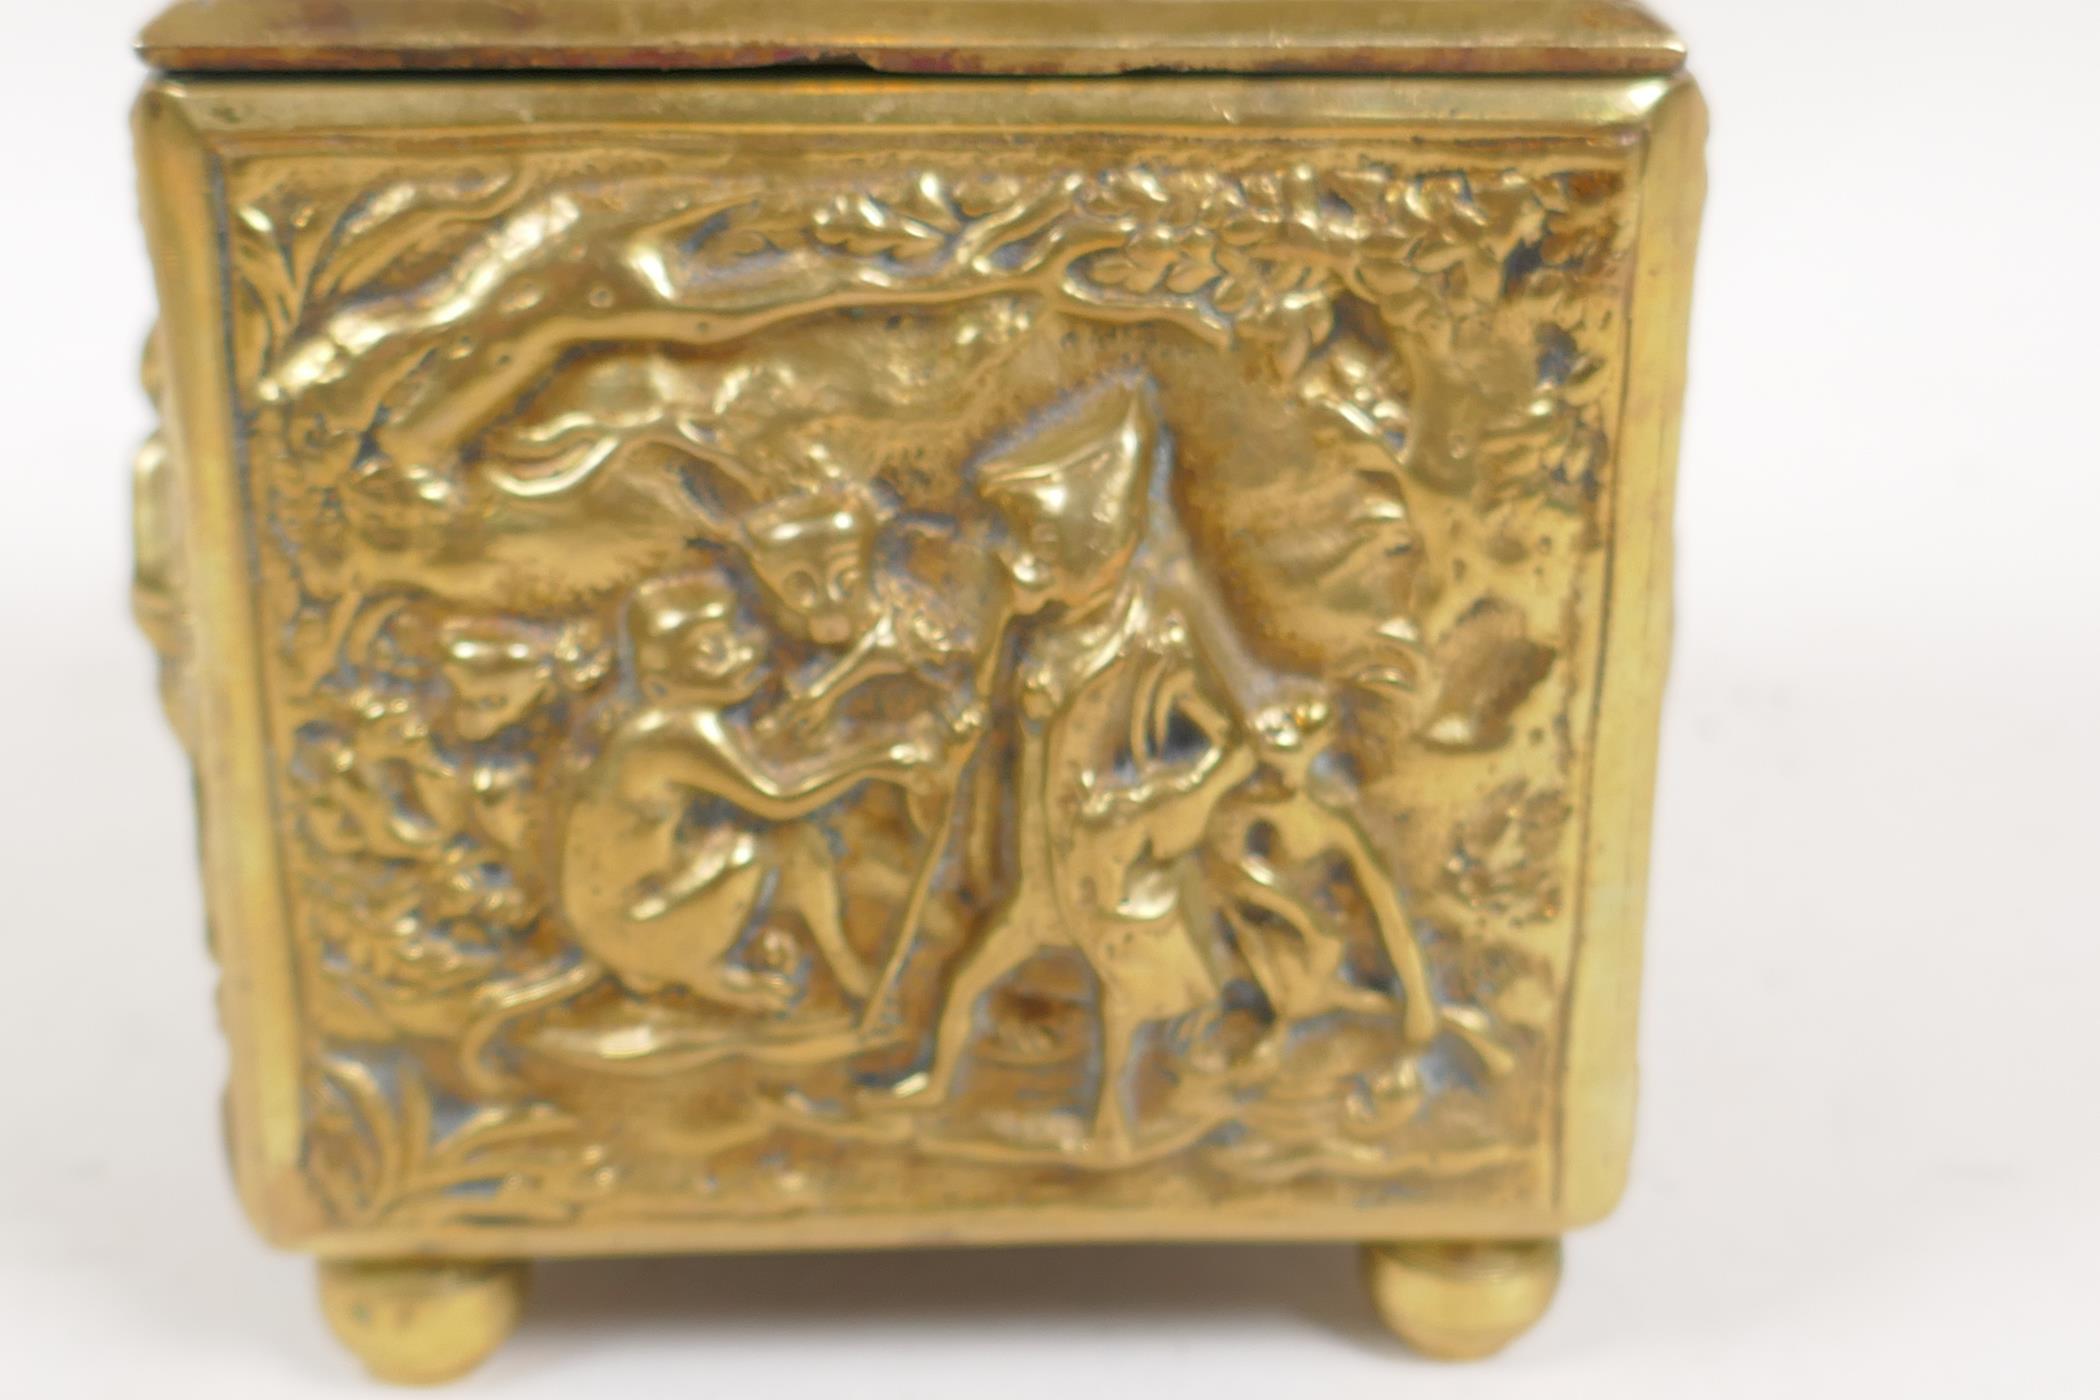 A late C18th/early C19th Dutch brass tobacco box embossed with a scene of a travelling monkey - Image 2 of 4